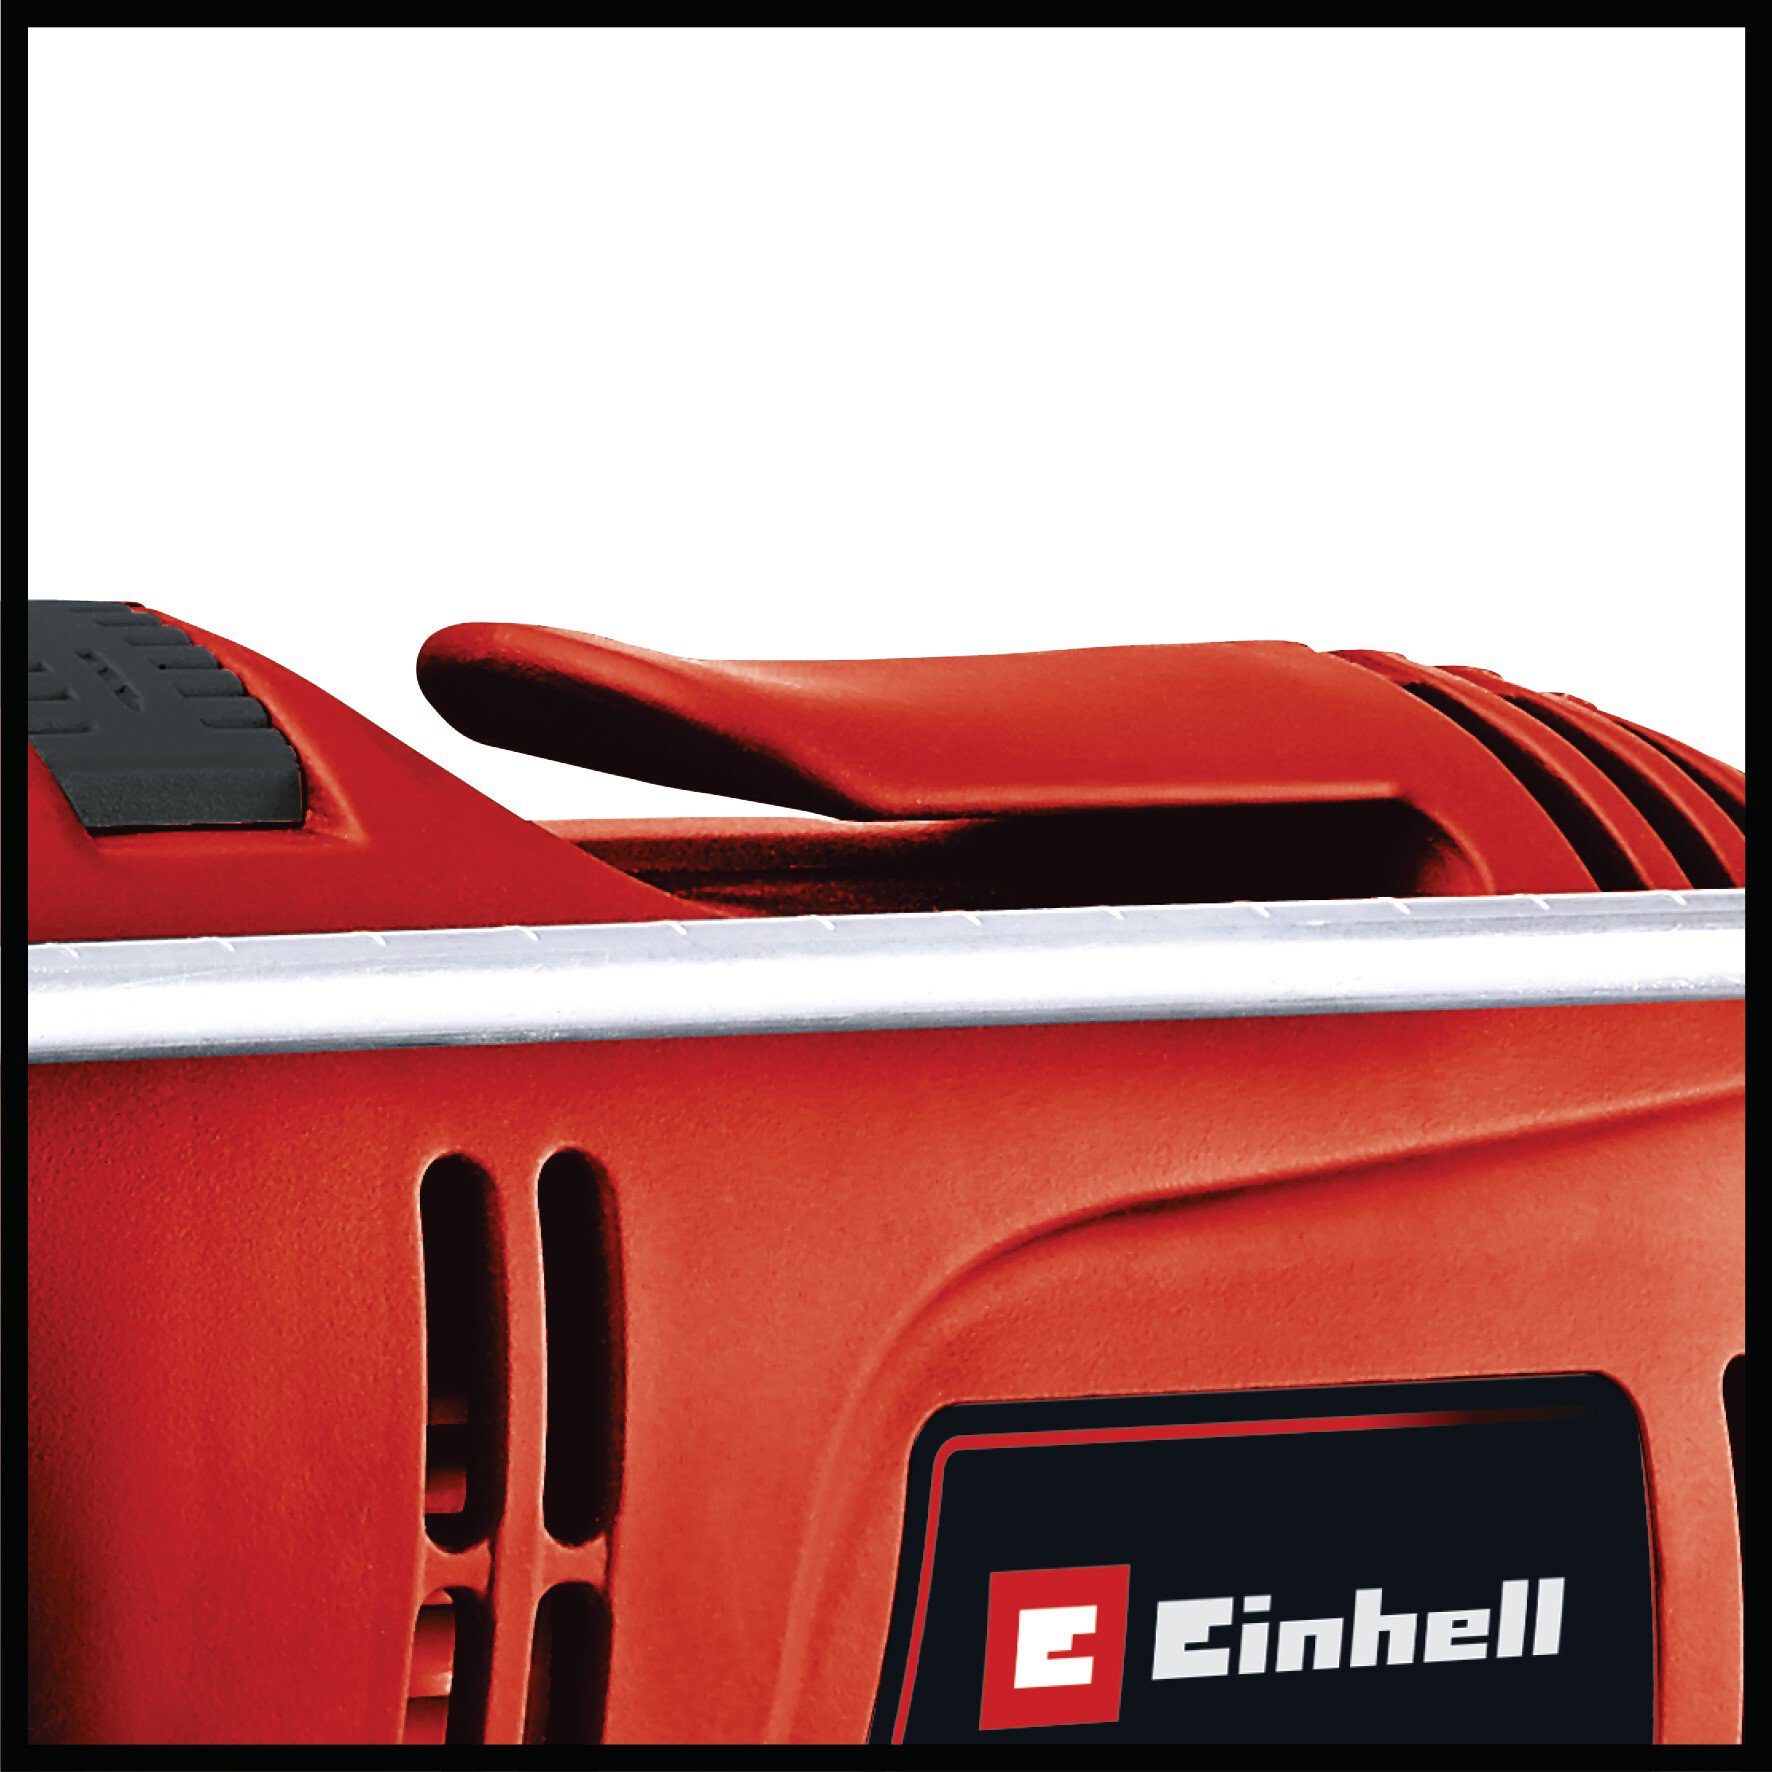 einhell-classic-impact-drill-4258682-detail_image-101